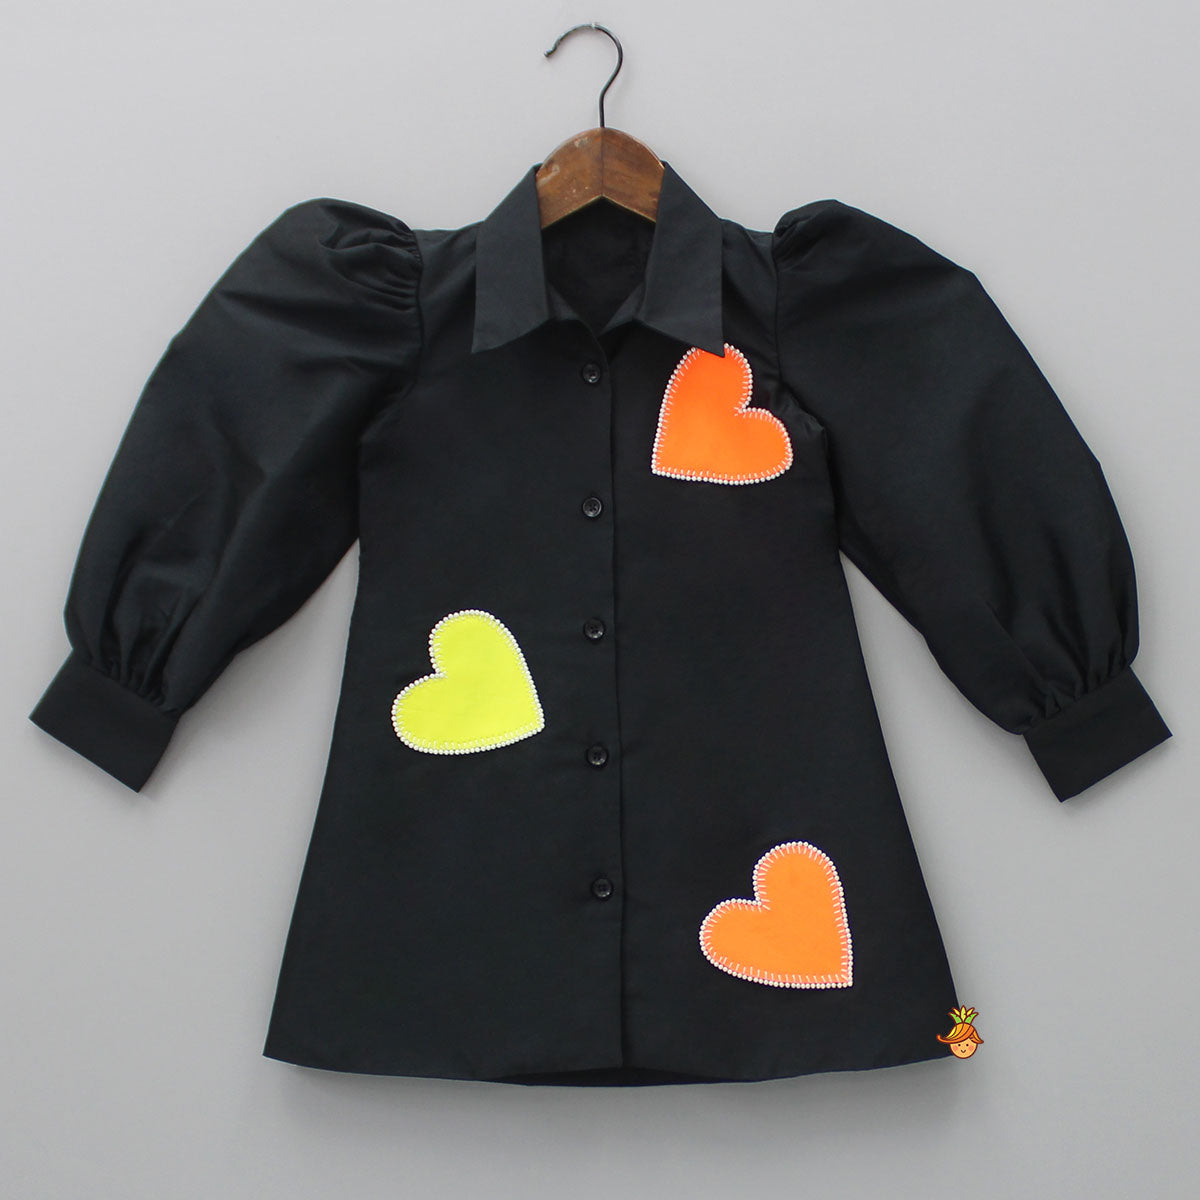 Heart Patch Work Black Collared Neck Dress